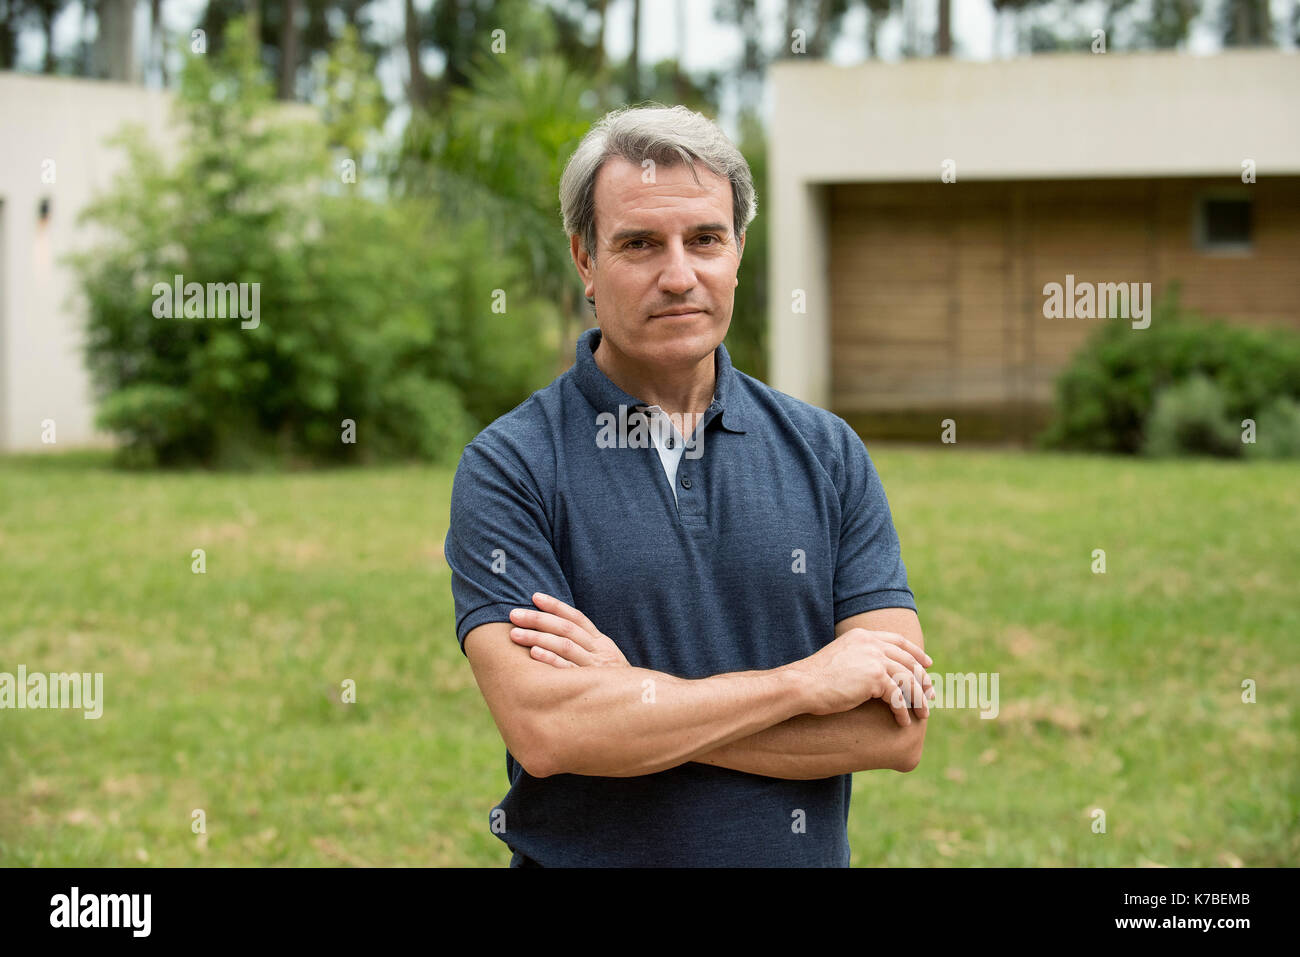 Mature man standing outoors, portrait Stock Photo